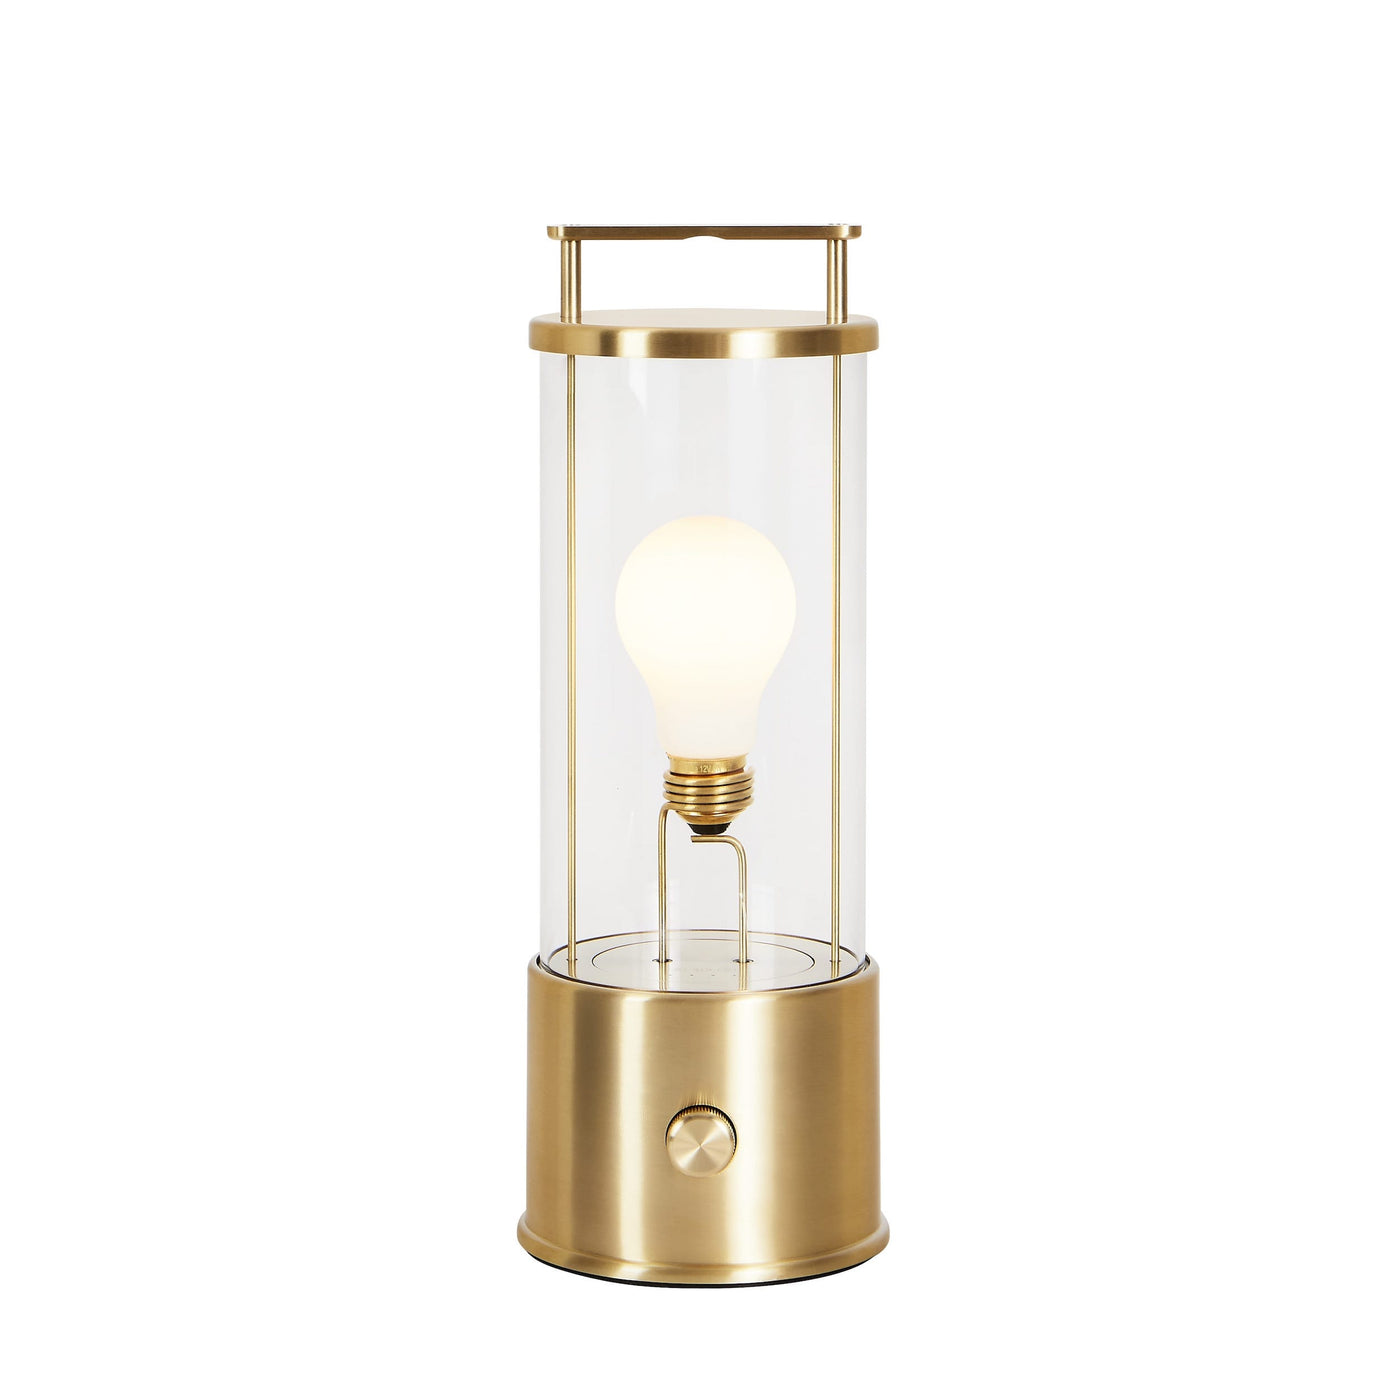 Tala x Farrow & Ball The Muse Portable Lamp. Ideal for outdoor use. Free + Fast UK delivery. #colour_brass